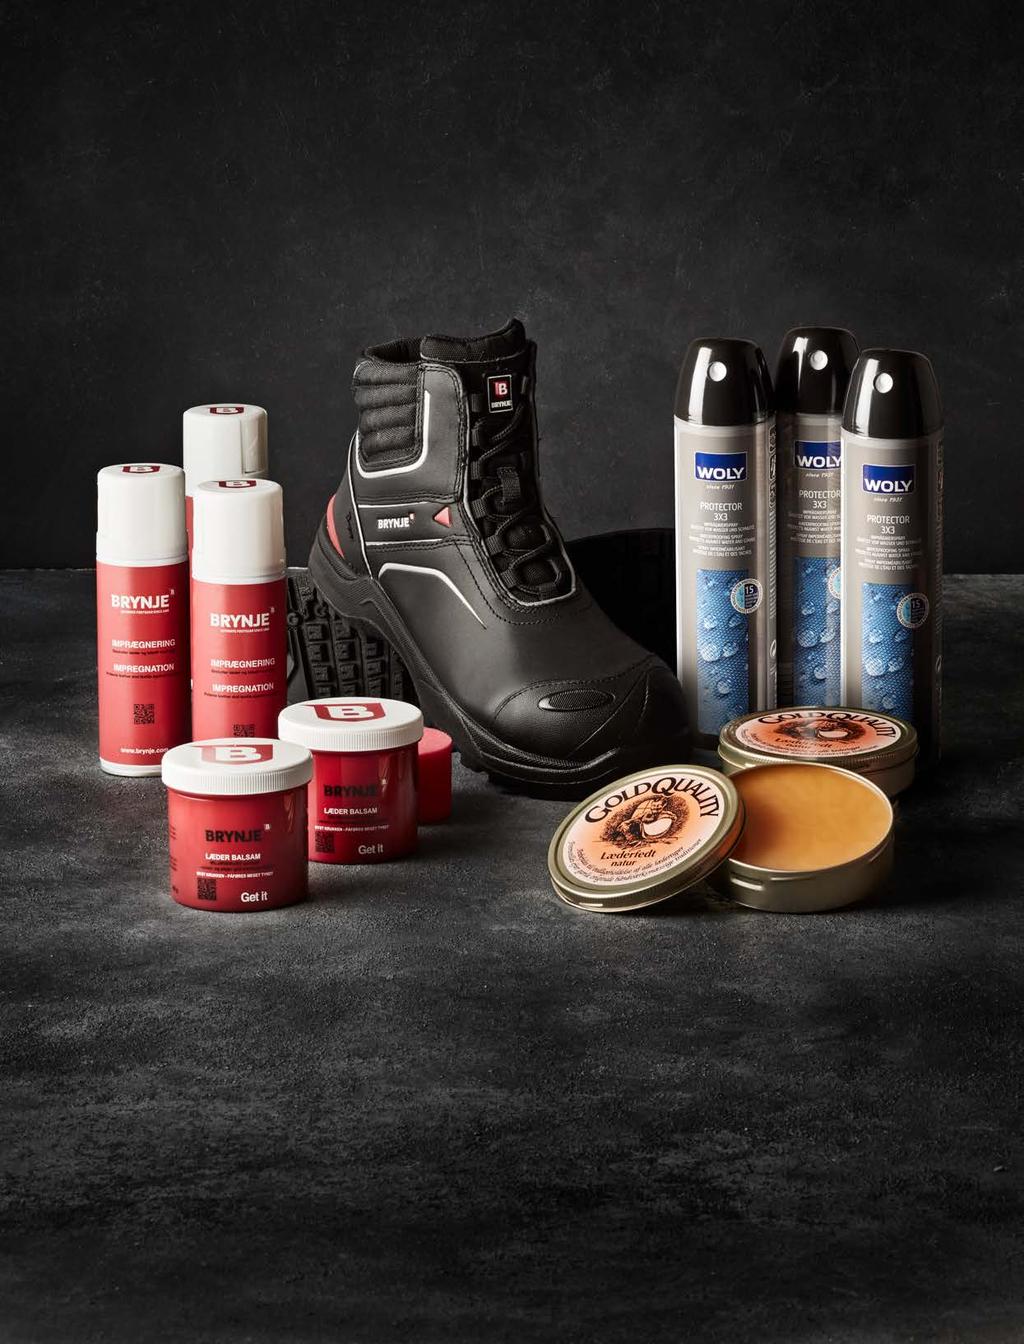 ACCES- PVC SORIES Caring for your footwear 68118 / BRYNJE IMPREGNATION 3801 / SIKA IMPREGNATION Protects plain hide and leather against moisture and prolongs the lifetime of the